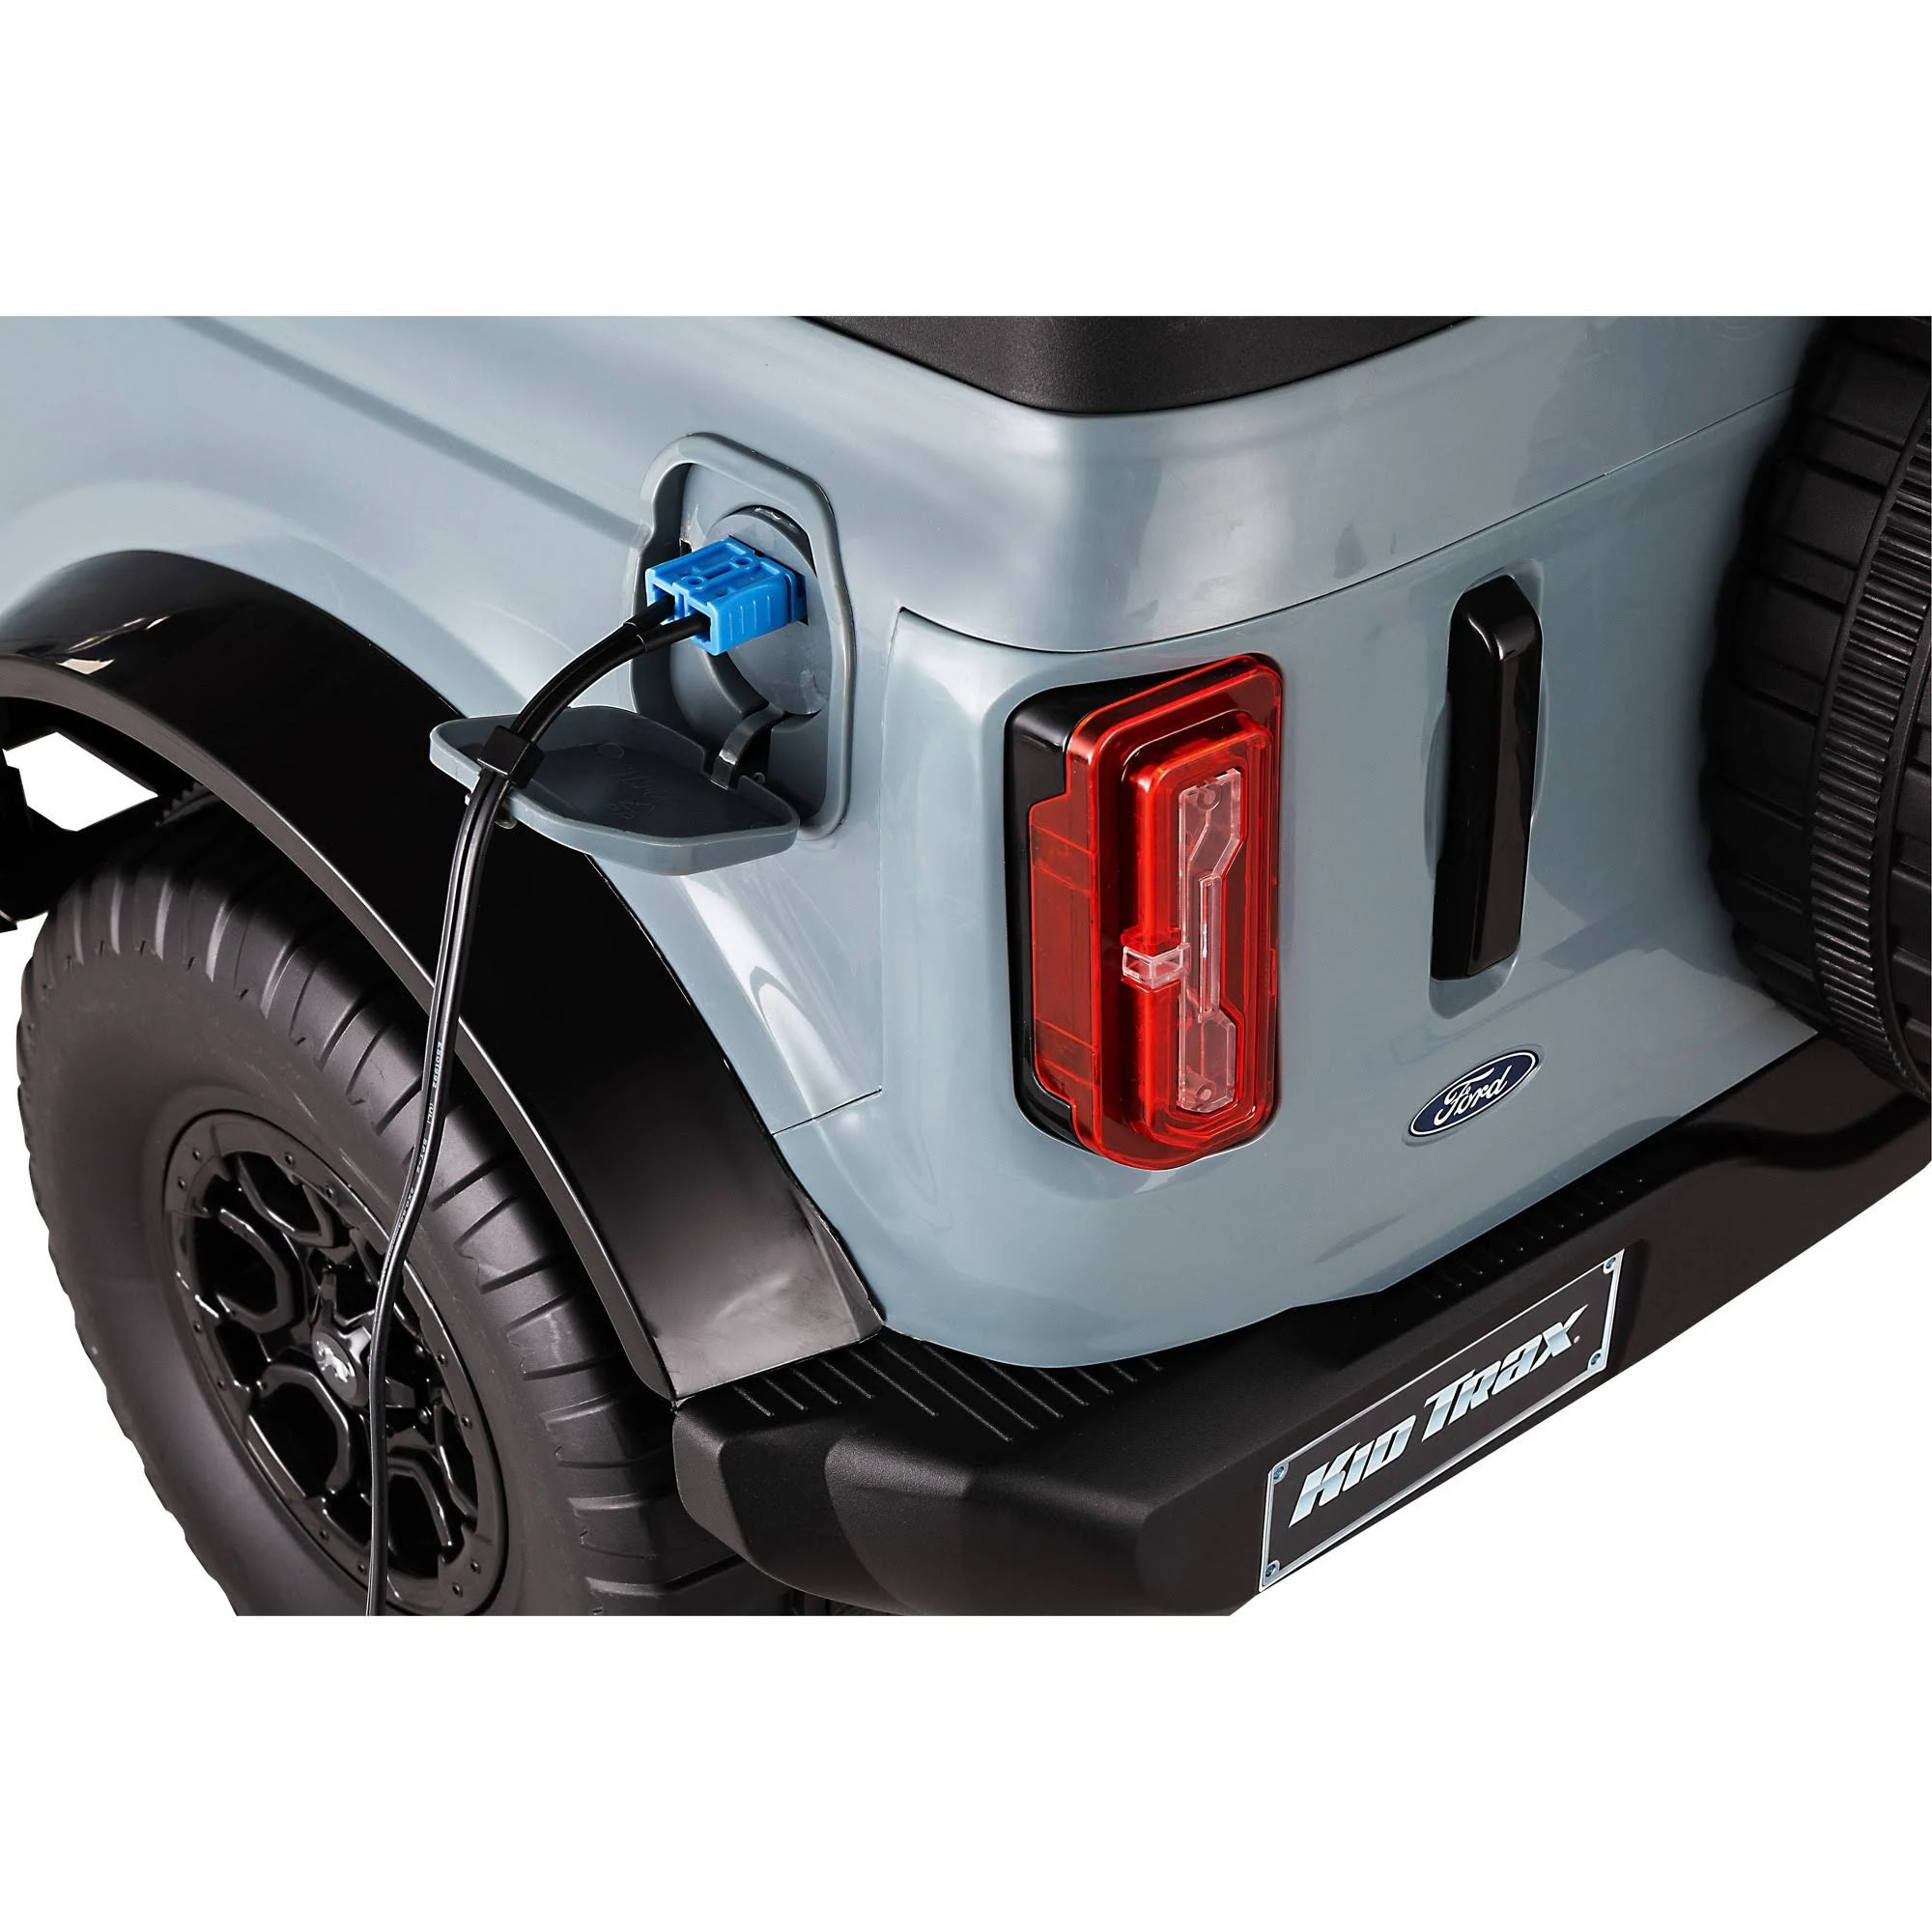 Kid Trax 12V Ford Bronco Battery Powered Ride on